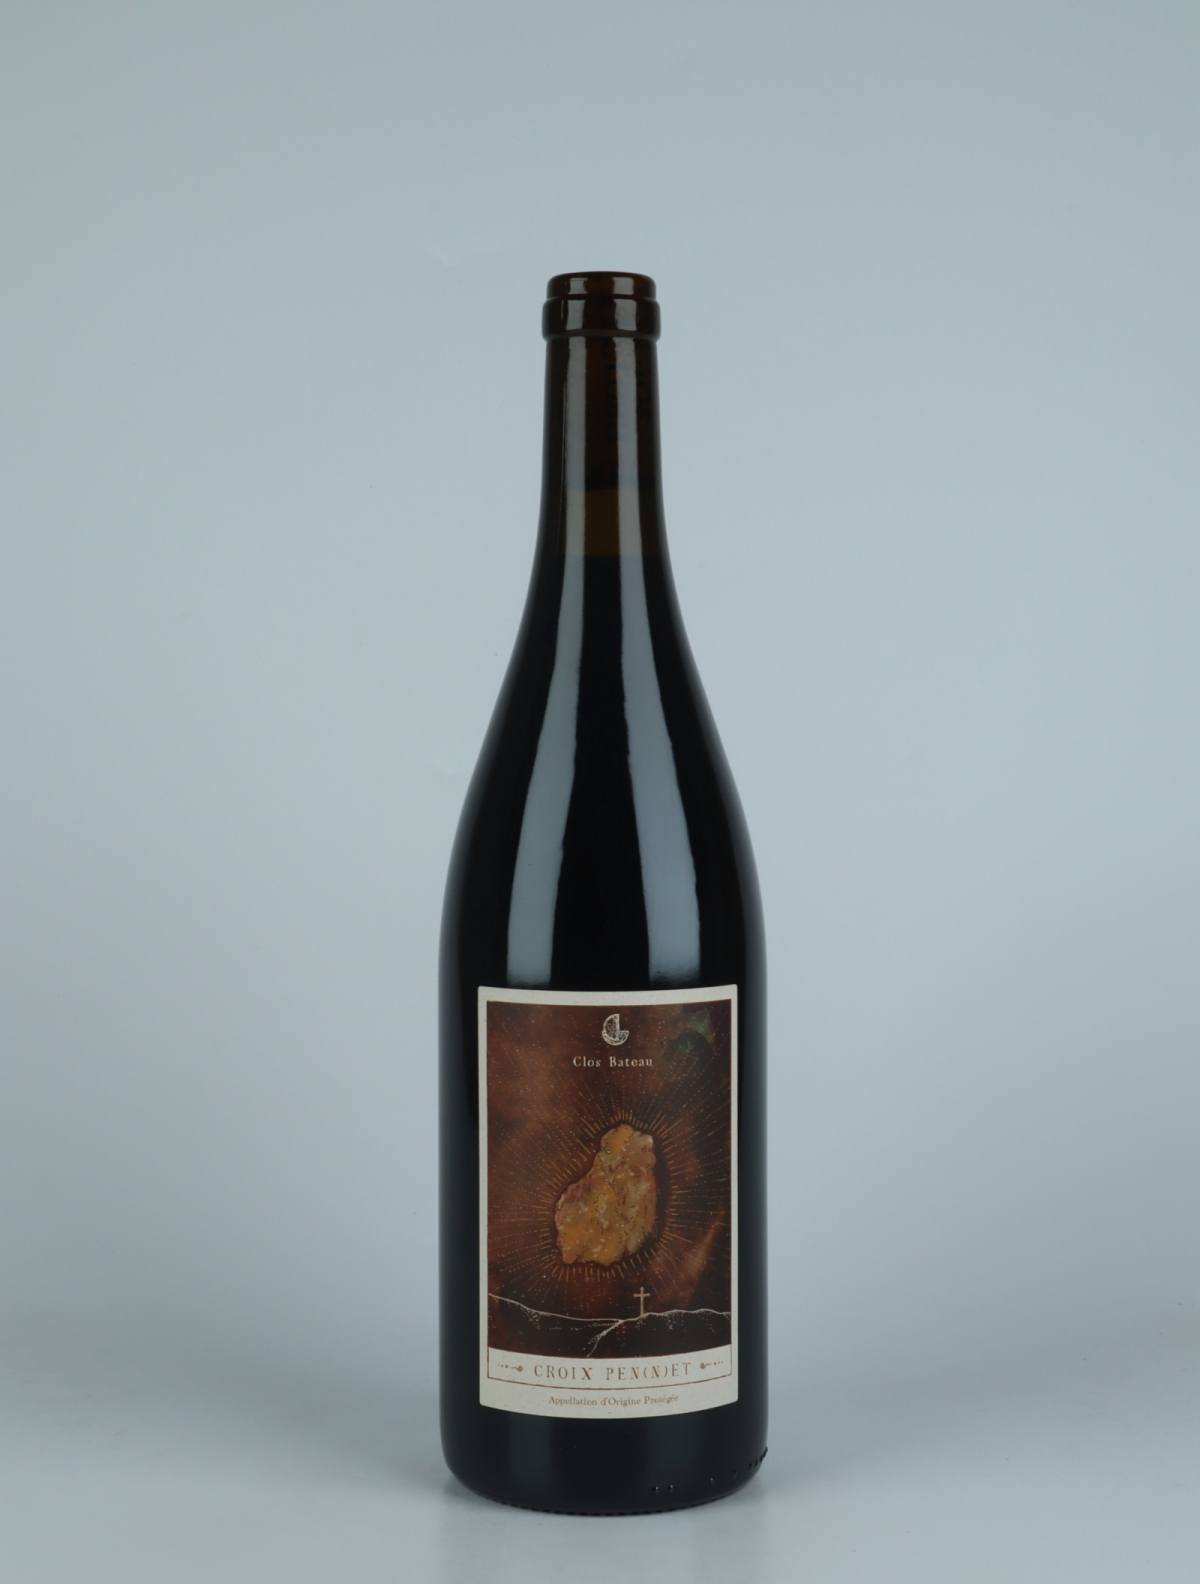 A bottle 2022 Croix Pennet Red wine from Clos Bateau, Beaujolais in France